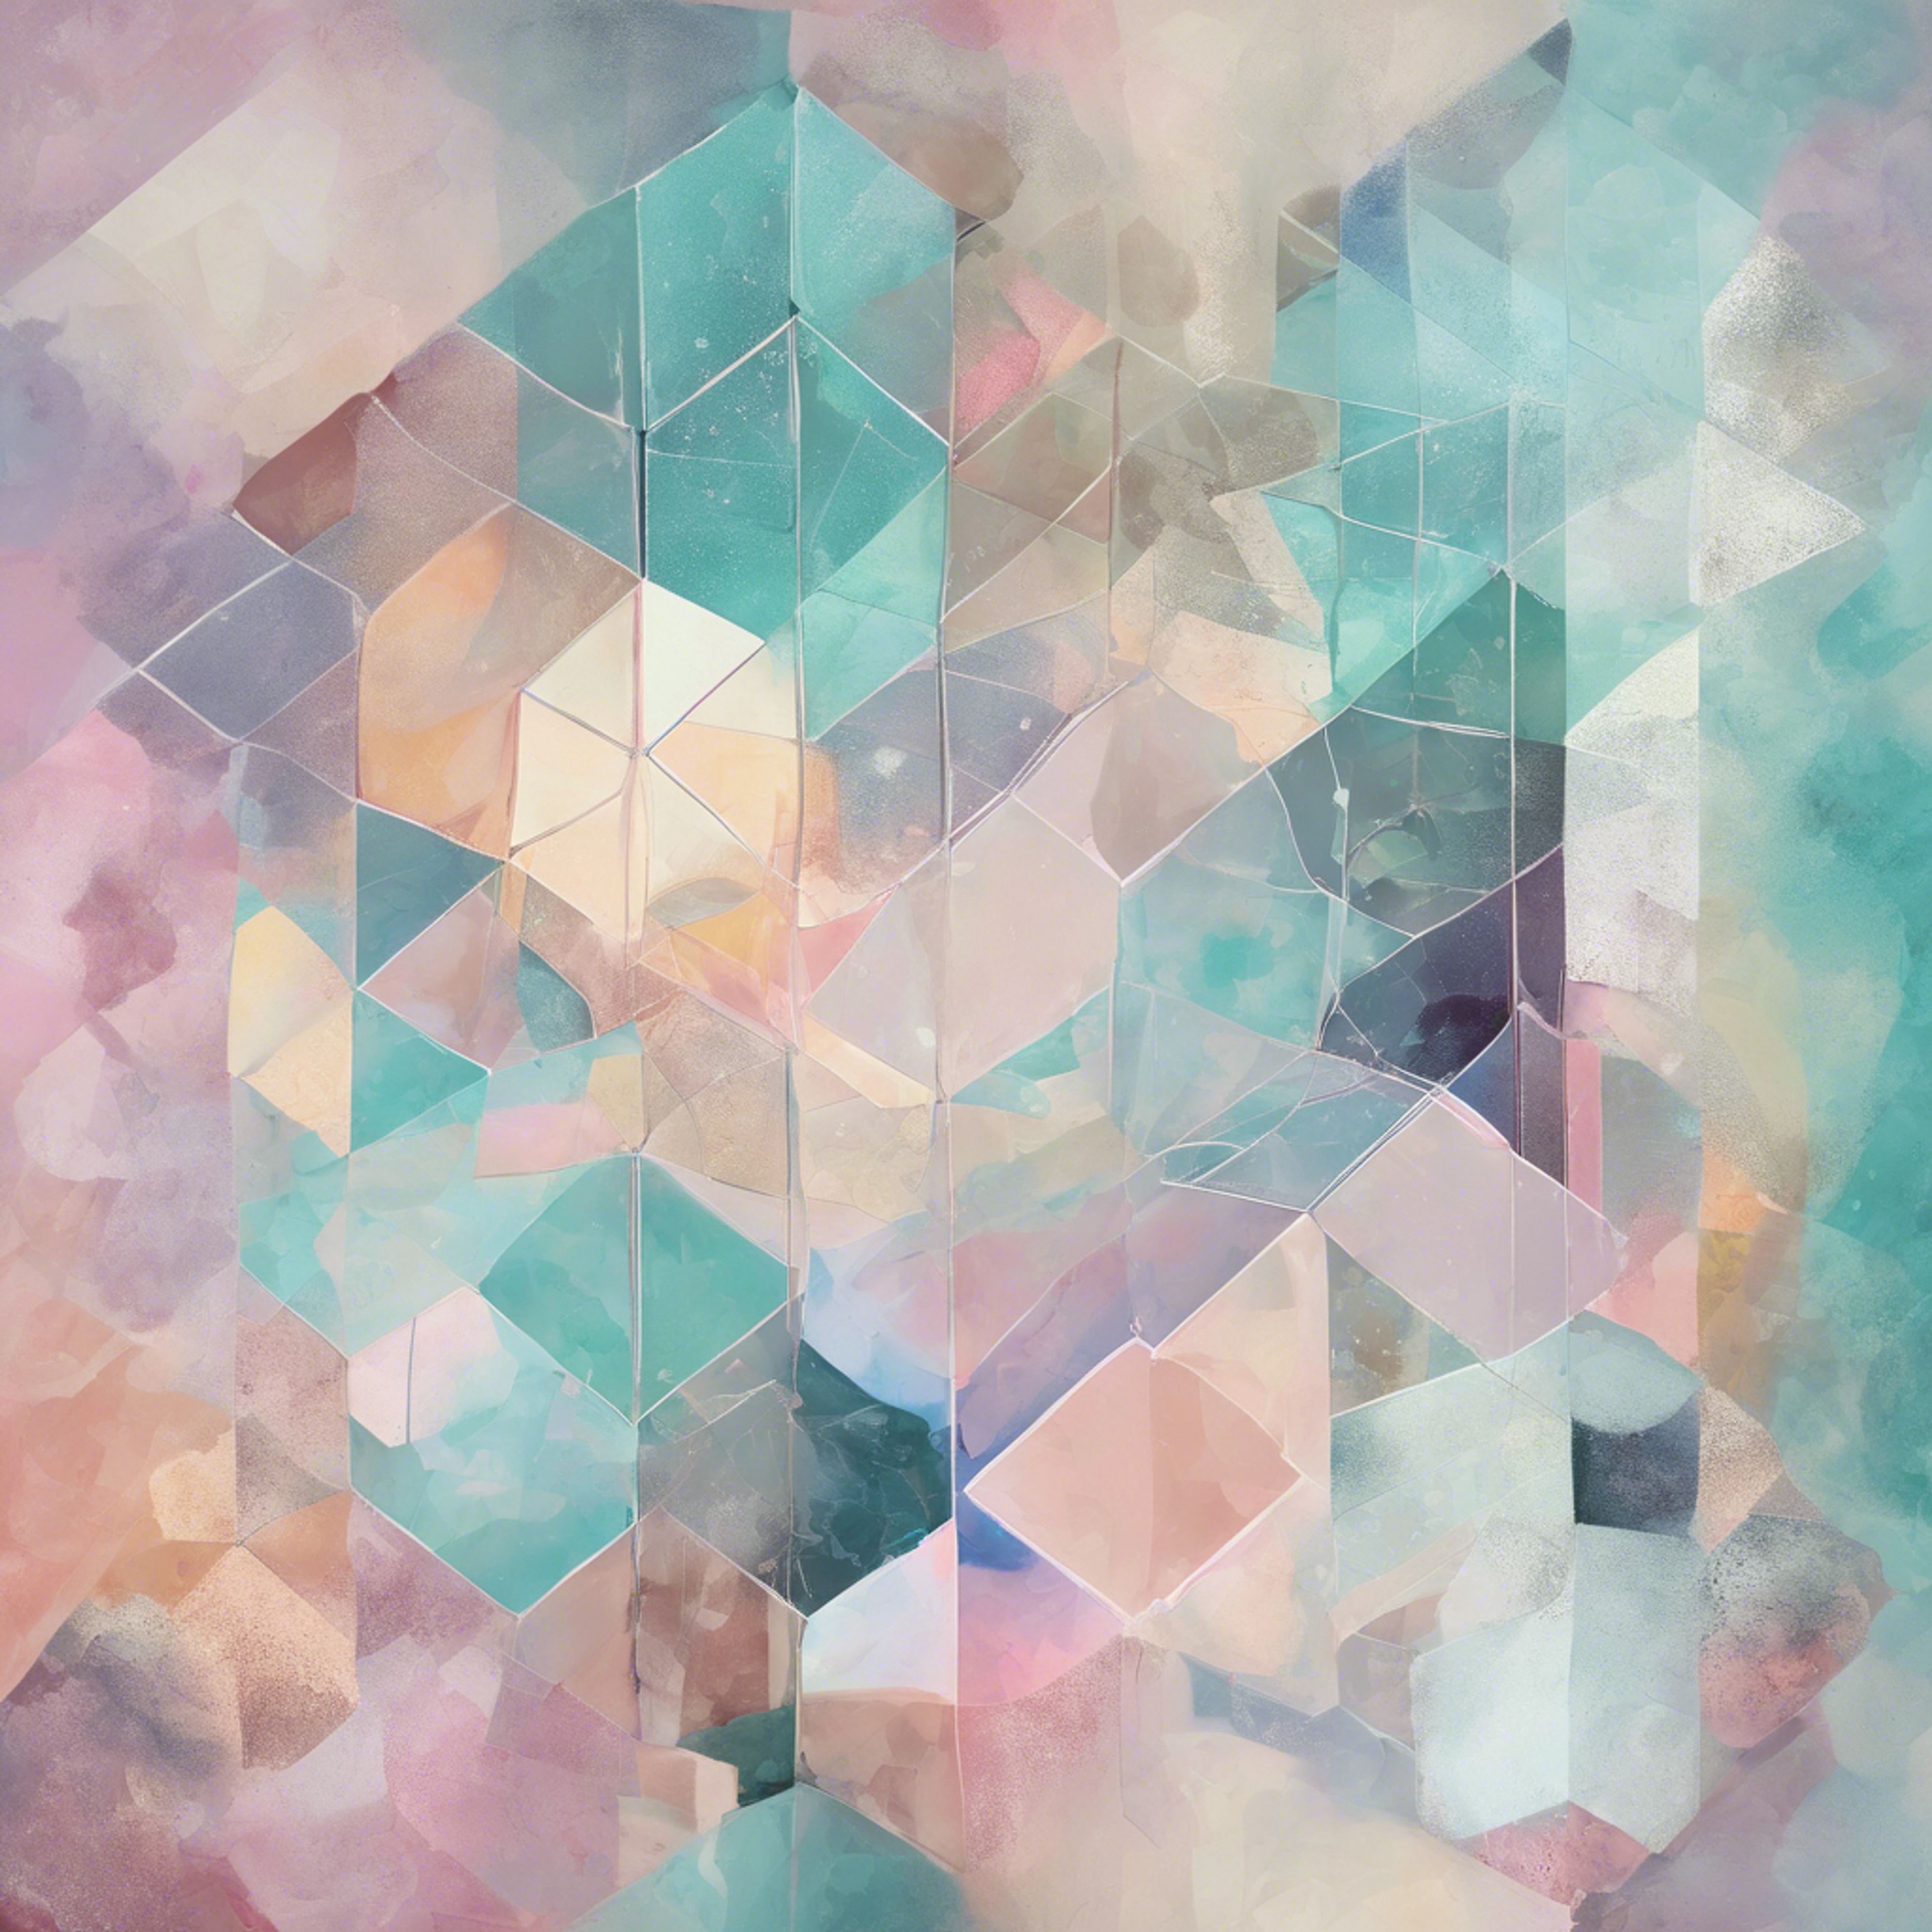 A cool pastel colored abstract painting emphasizing geometric patterns. Ταπετσαρία[4610bdb5de564f779c91]